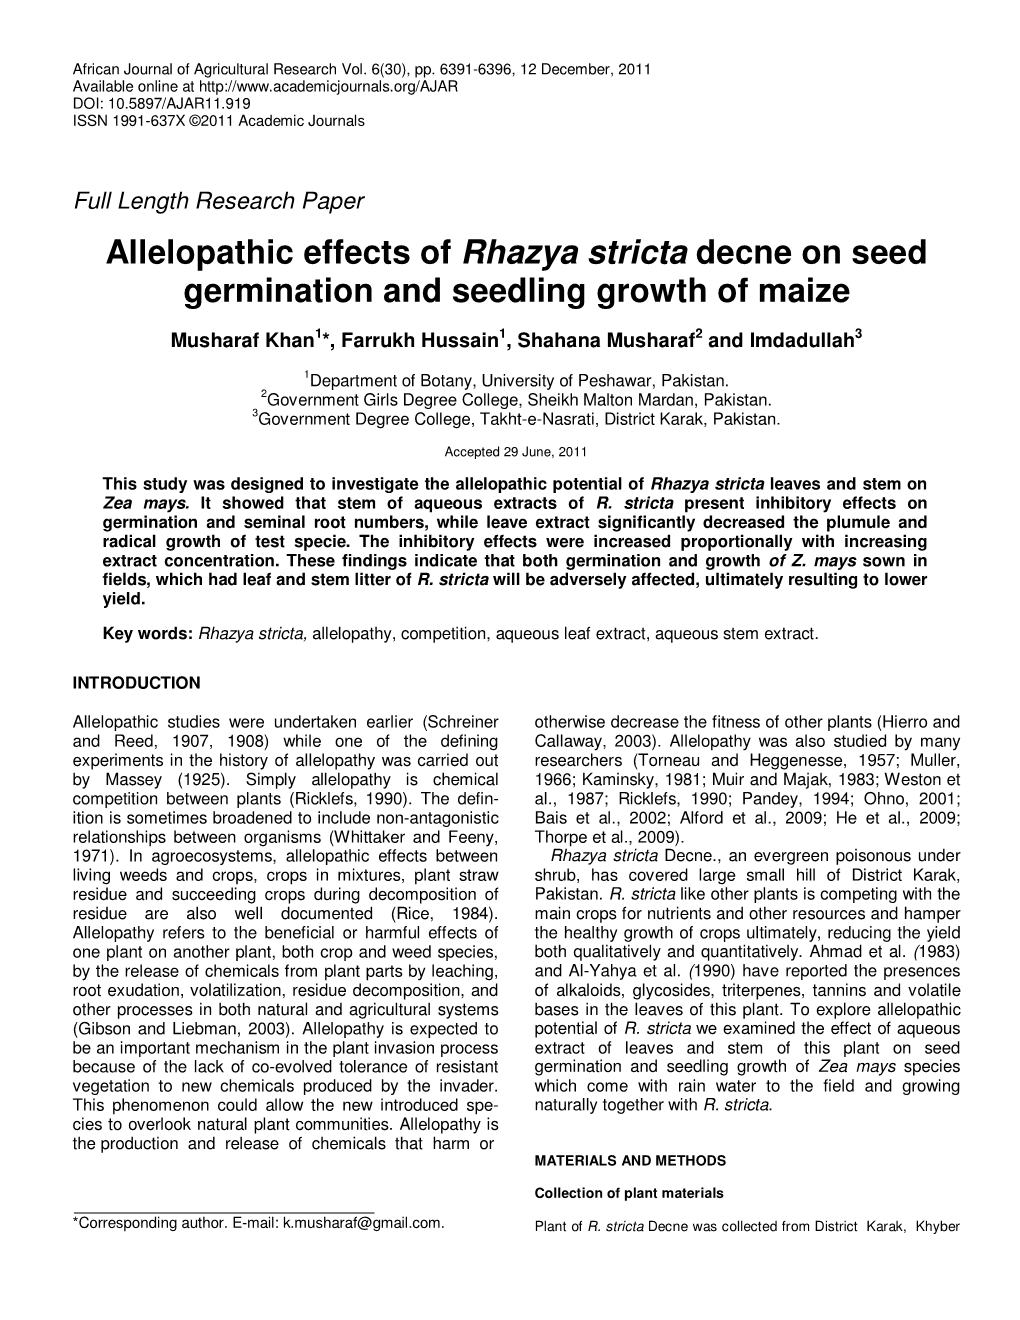 Rhazya Stricta Decne on Seed Germination and Seedling Growth of Maize